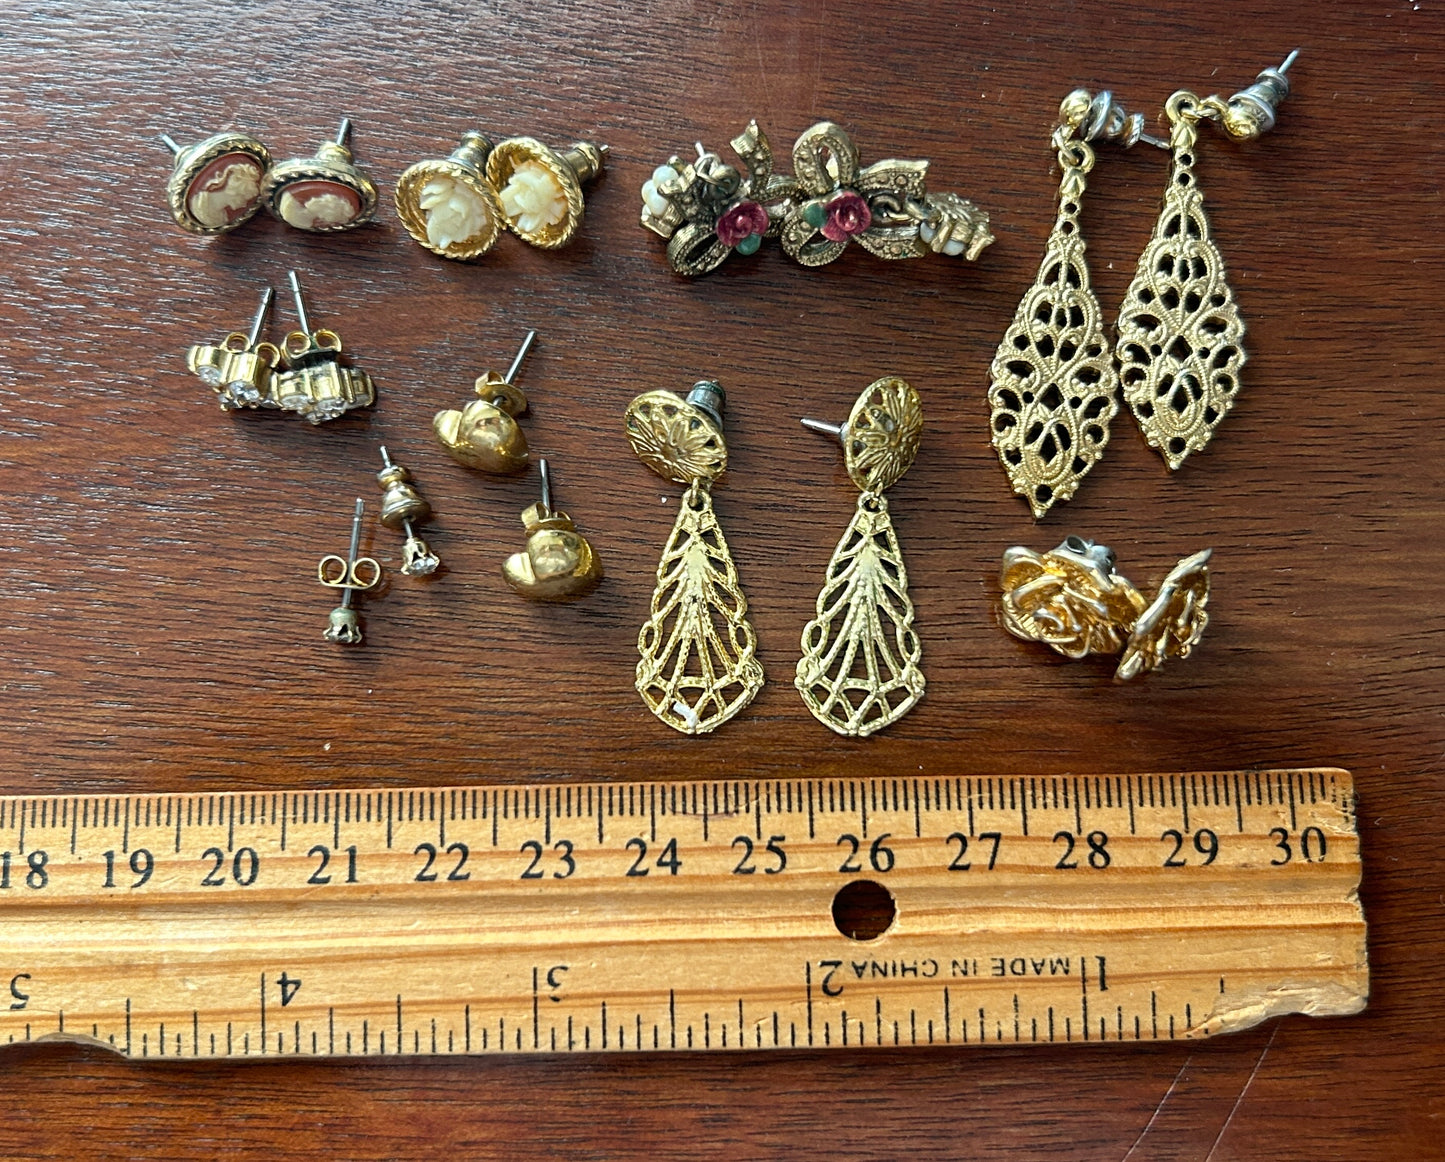 Vintage Victorian Style Pierced Earring Lot Carved Flowers Cameo Rose